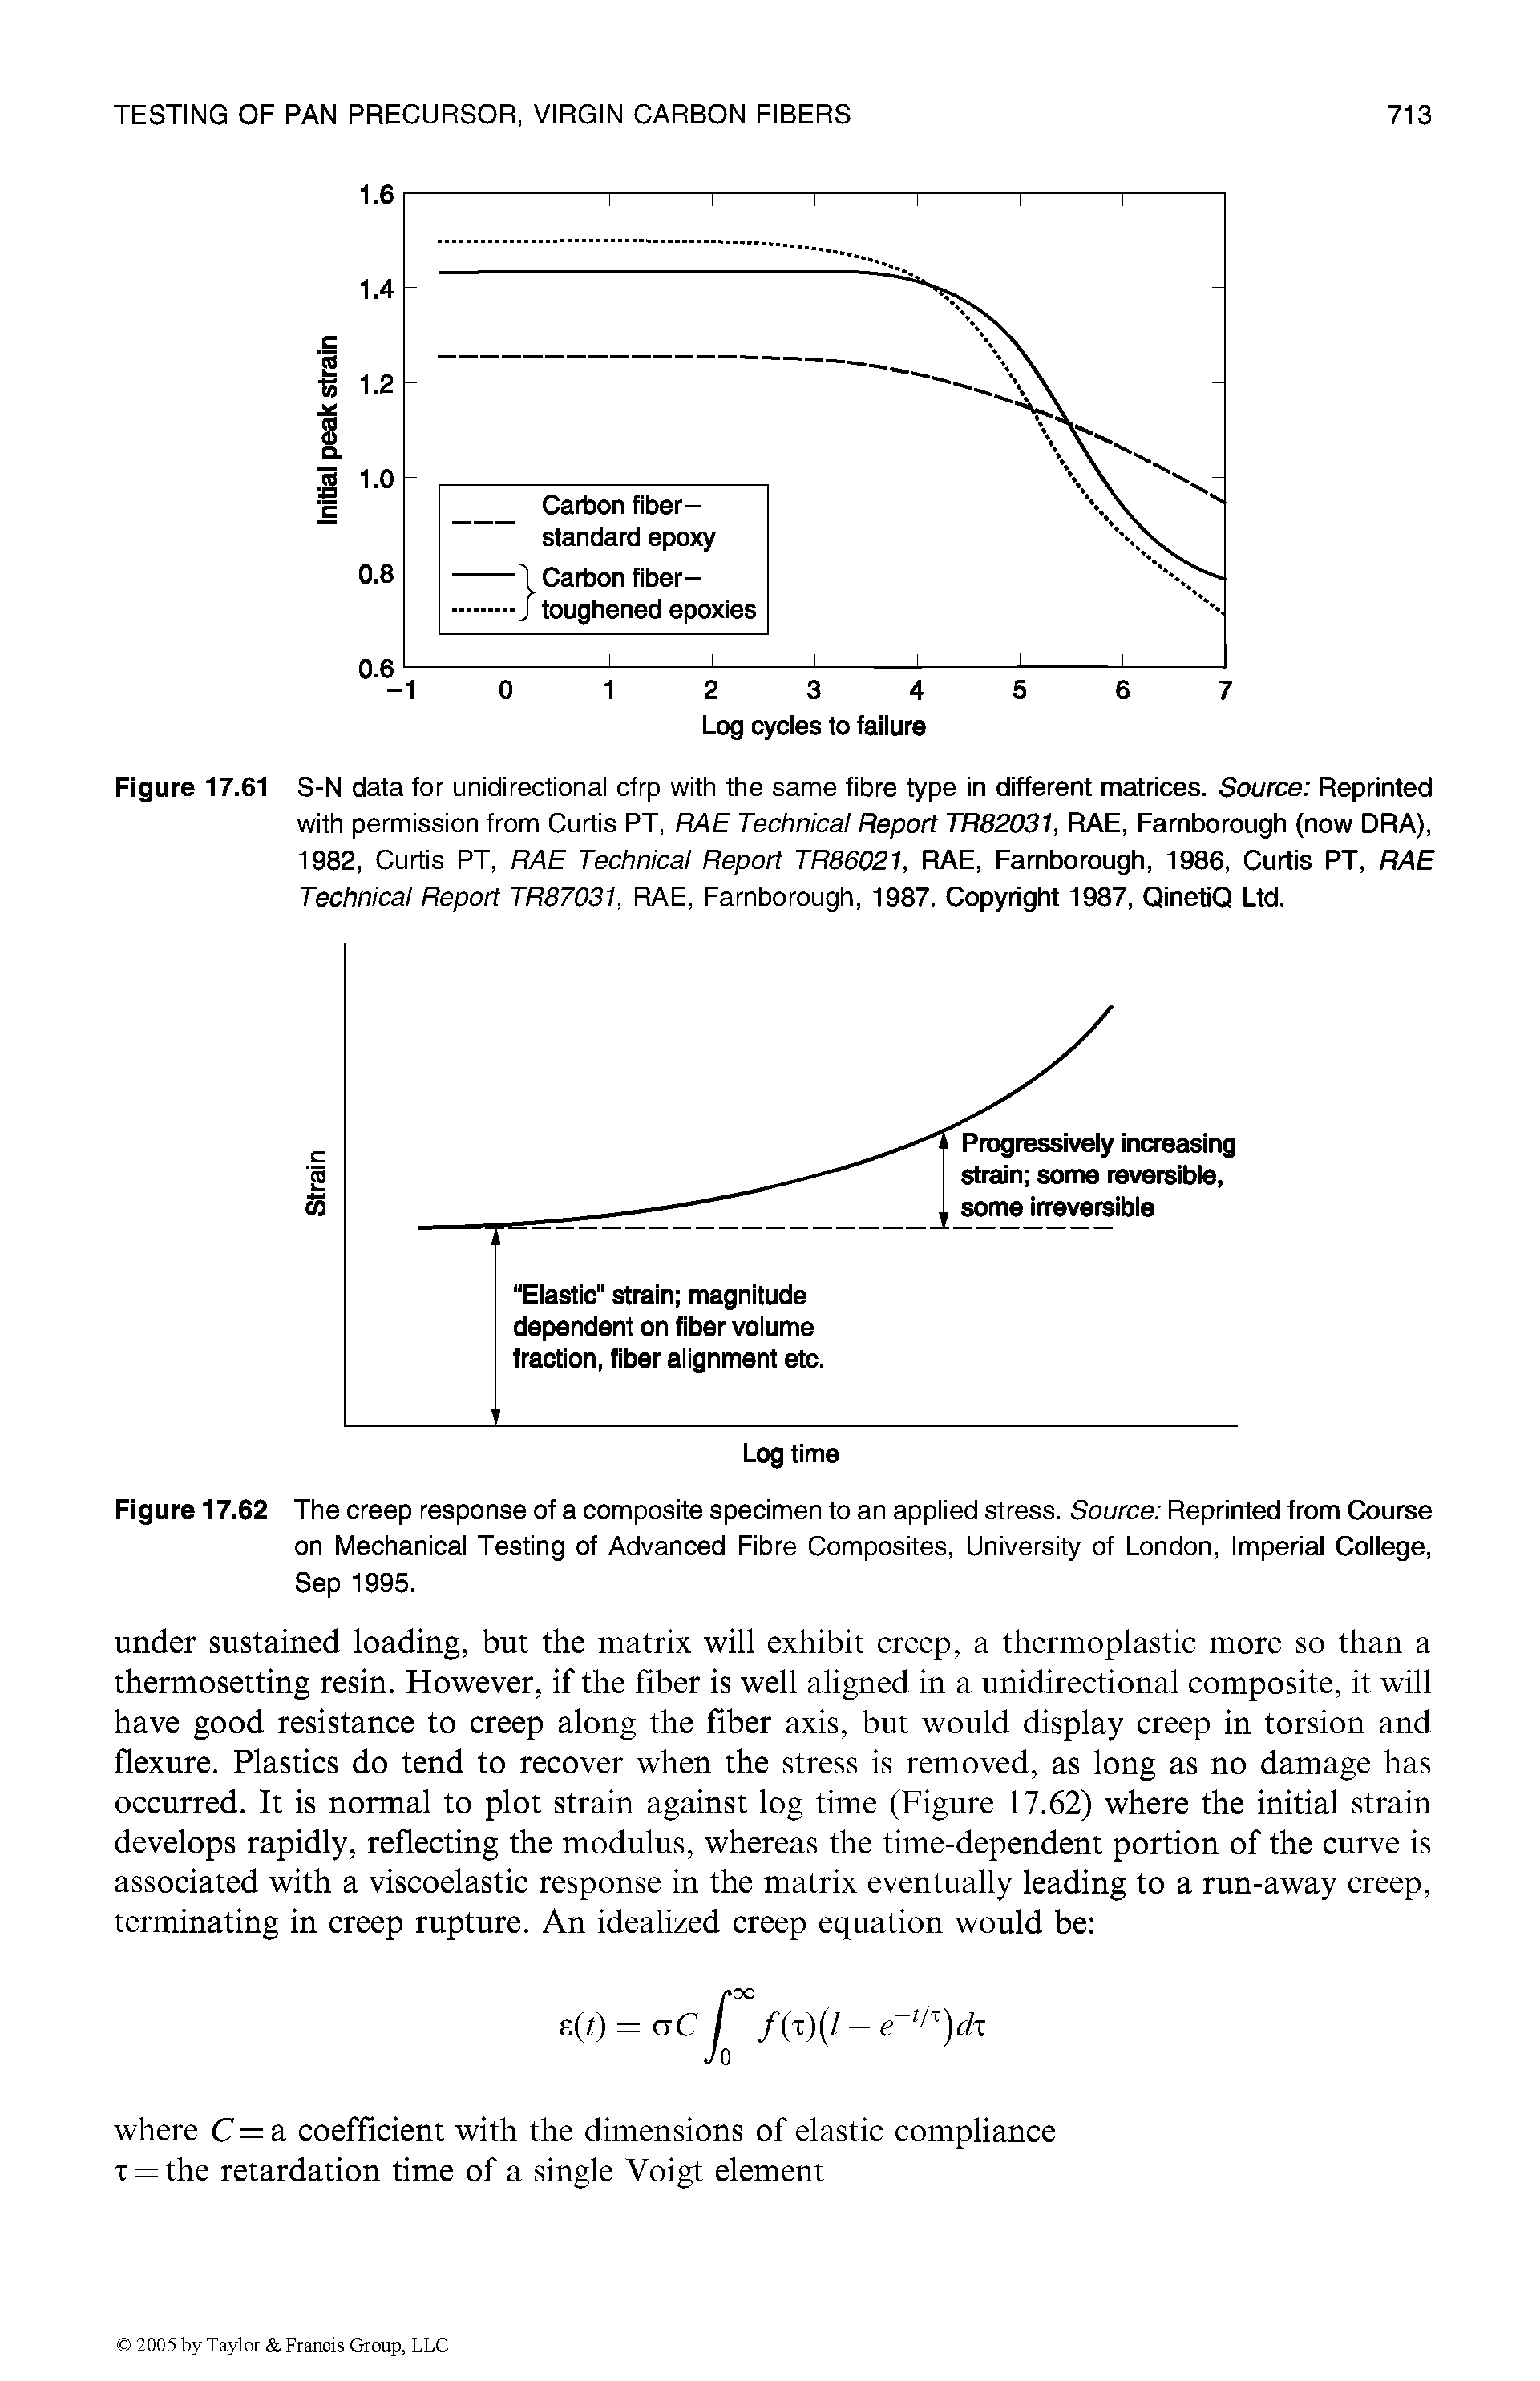 Figure 17.62 The creep response of a composite specimen to an applied stress. Source Reprinted from Course on Mechanical Testing of Advanced Fibre Composites, University of London, Imperial College, Sep 1995.